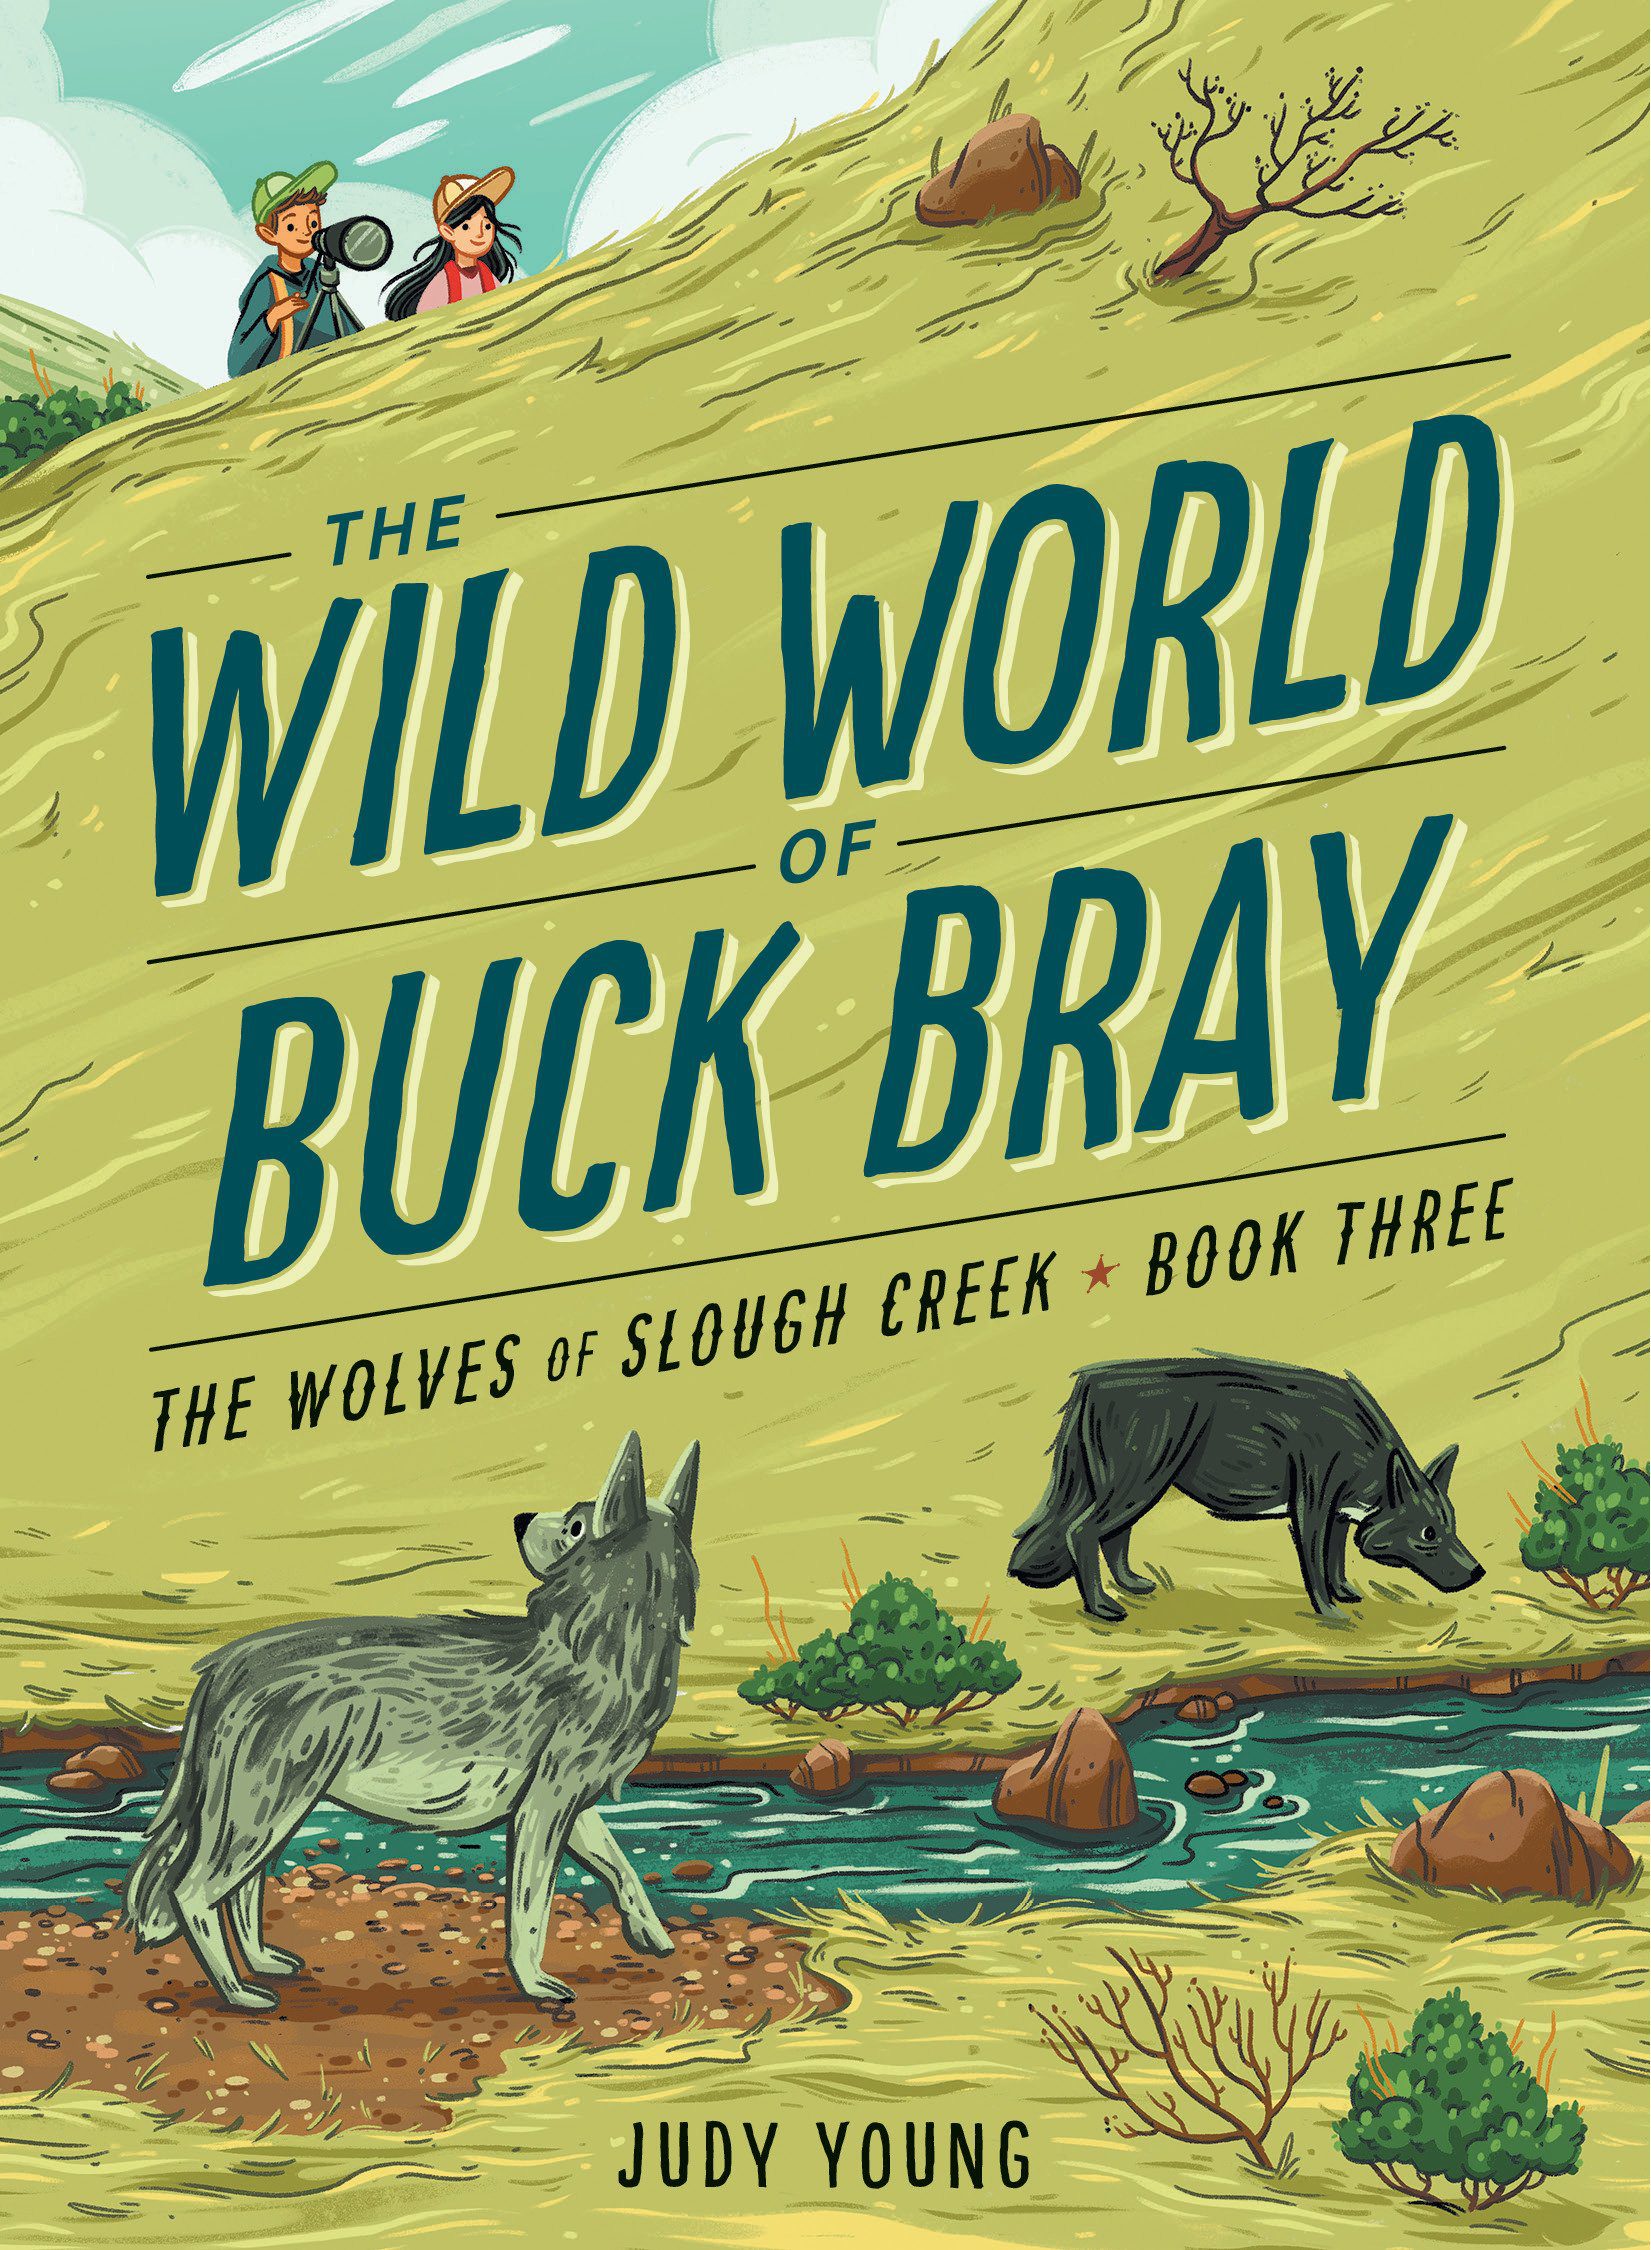 The Wolves of Slough Creek (The Wild World of Buck Bray)